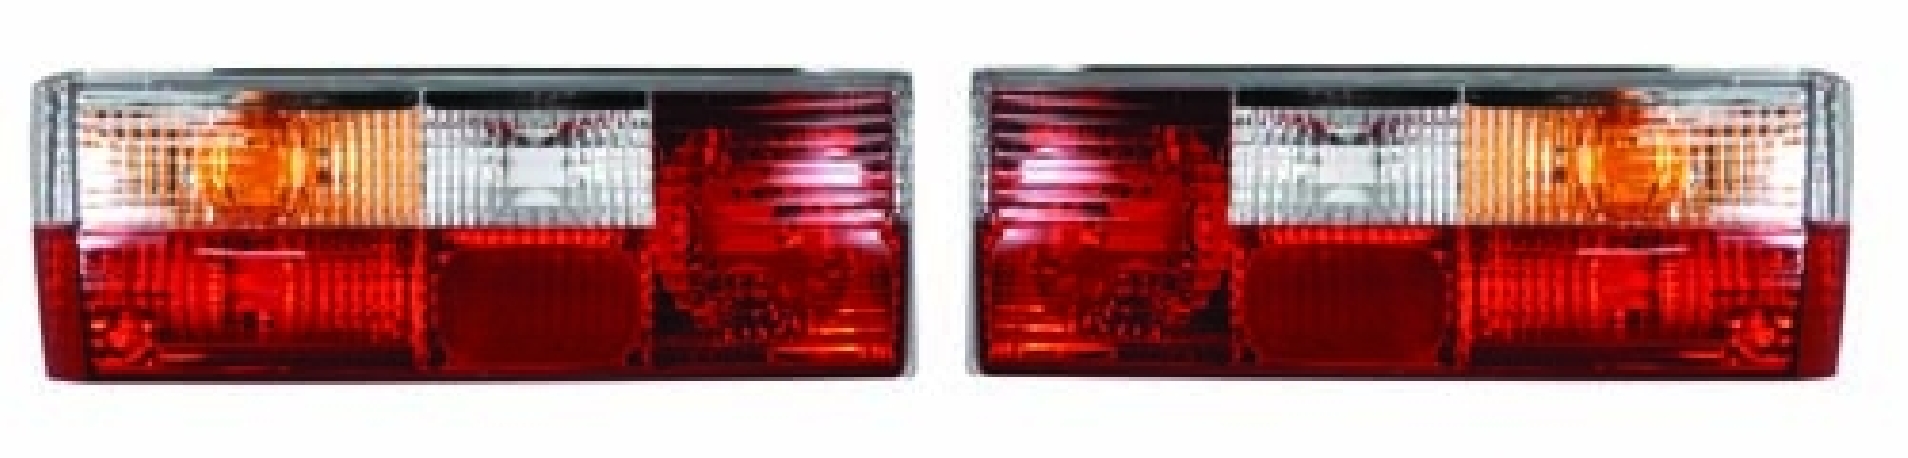 Rear Lamps, Mk1 Golf Series 2, M3 Style Clear and Red